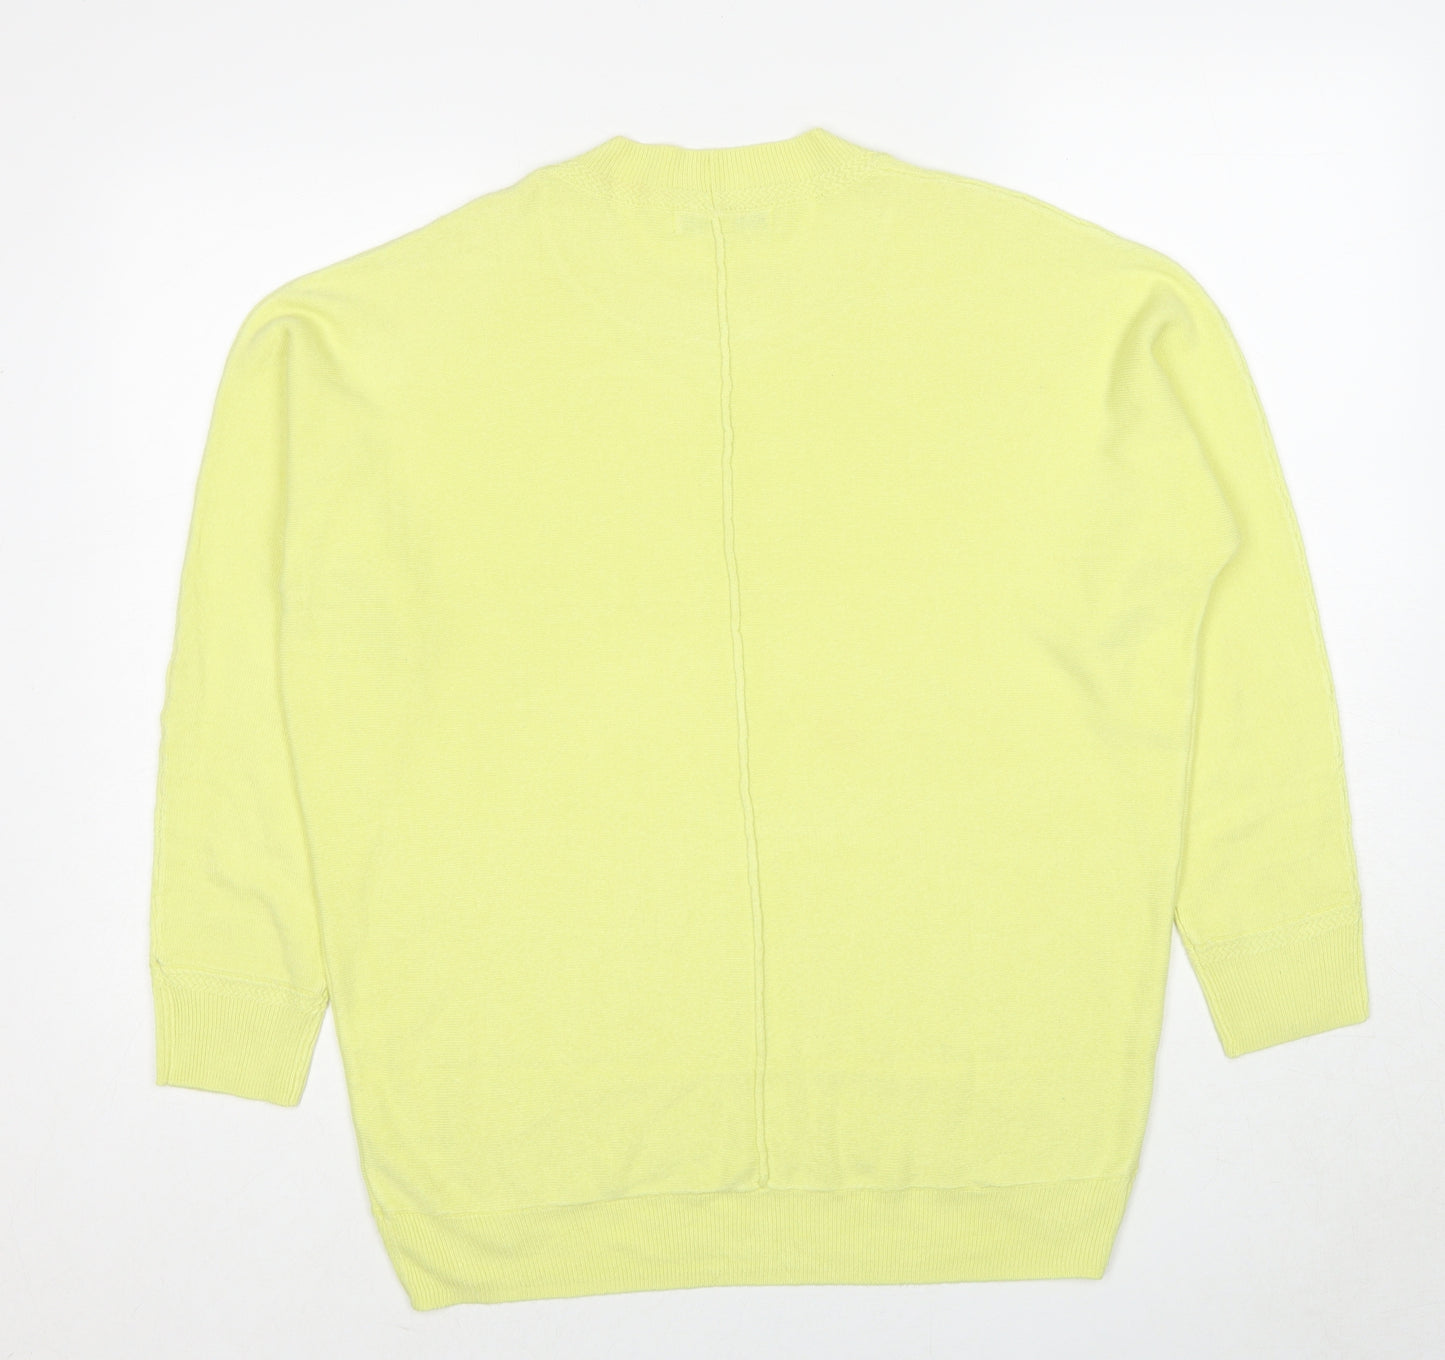 NEXT Womens Yellow Crew Neck Acrylic Pullover Jumper Size S